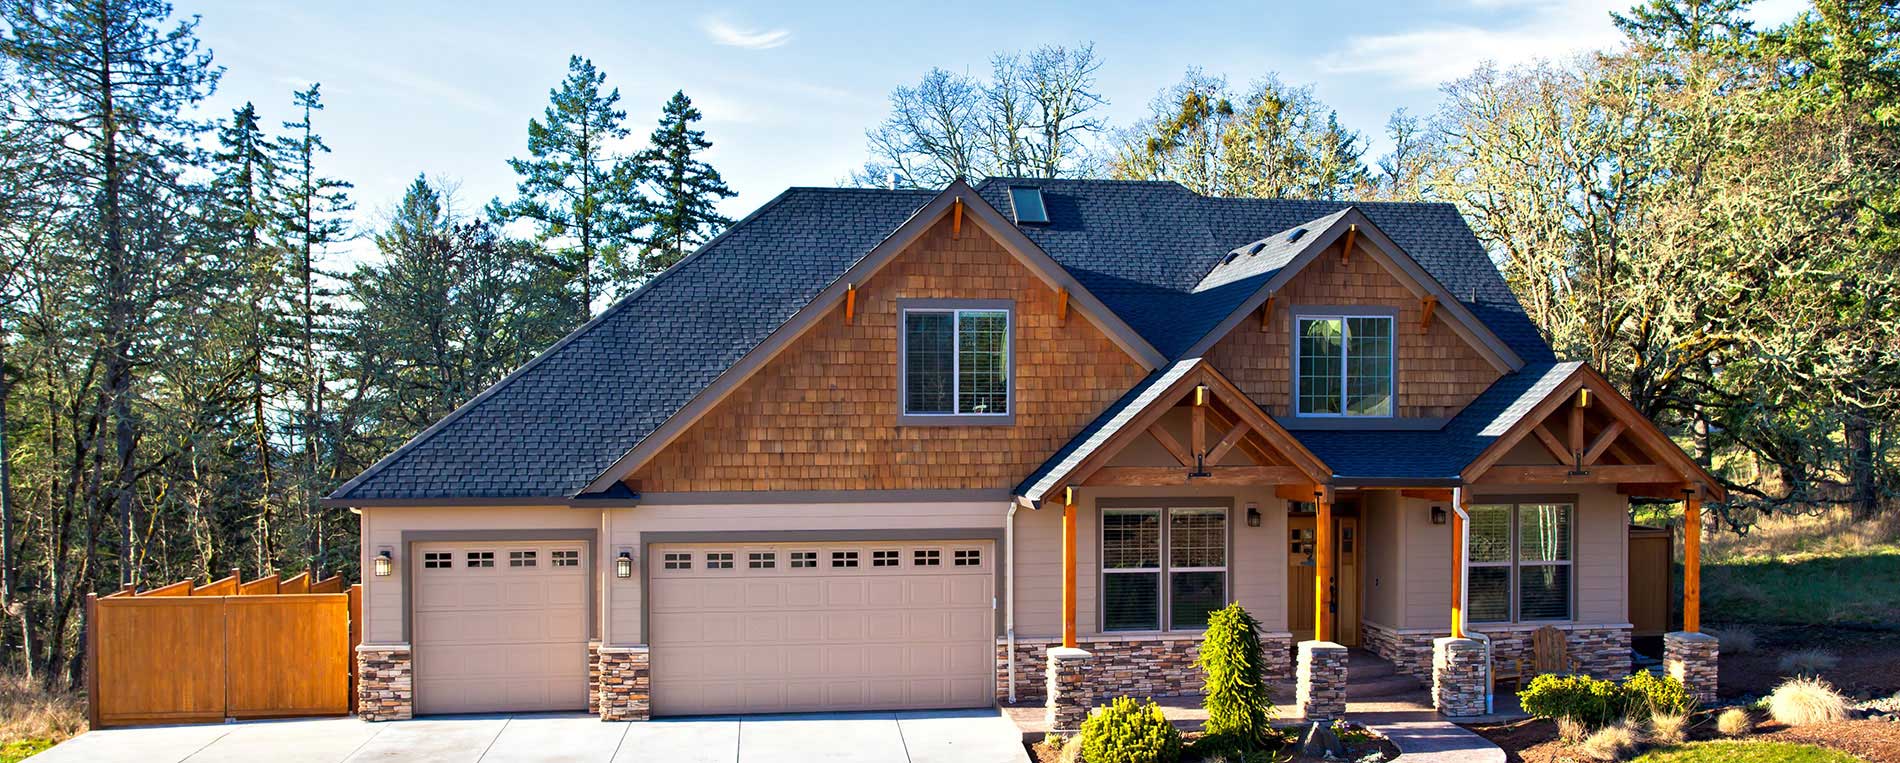 What You Need To Consider Before Buying a New Garage Door